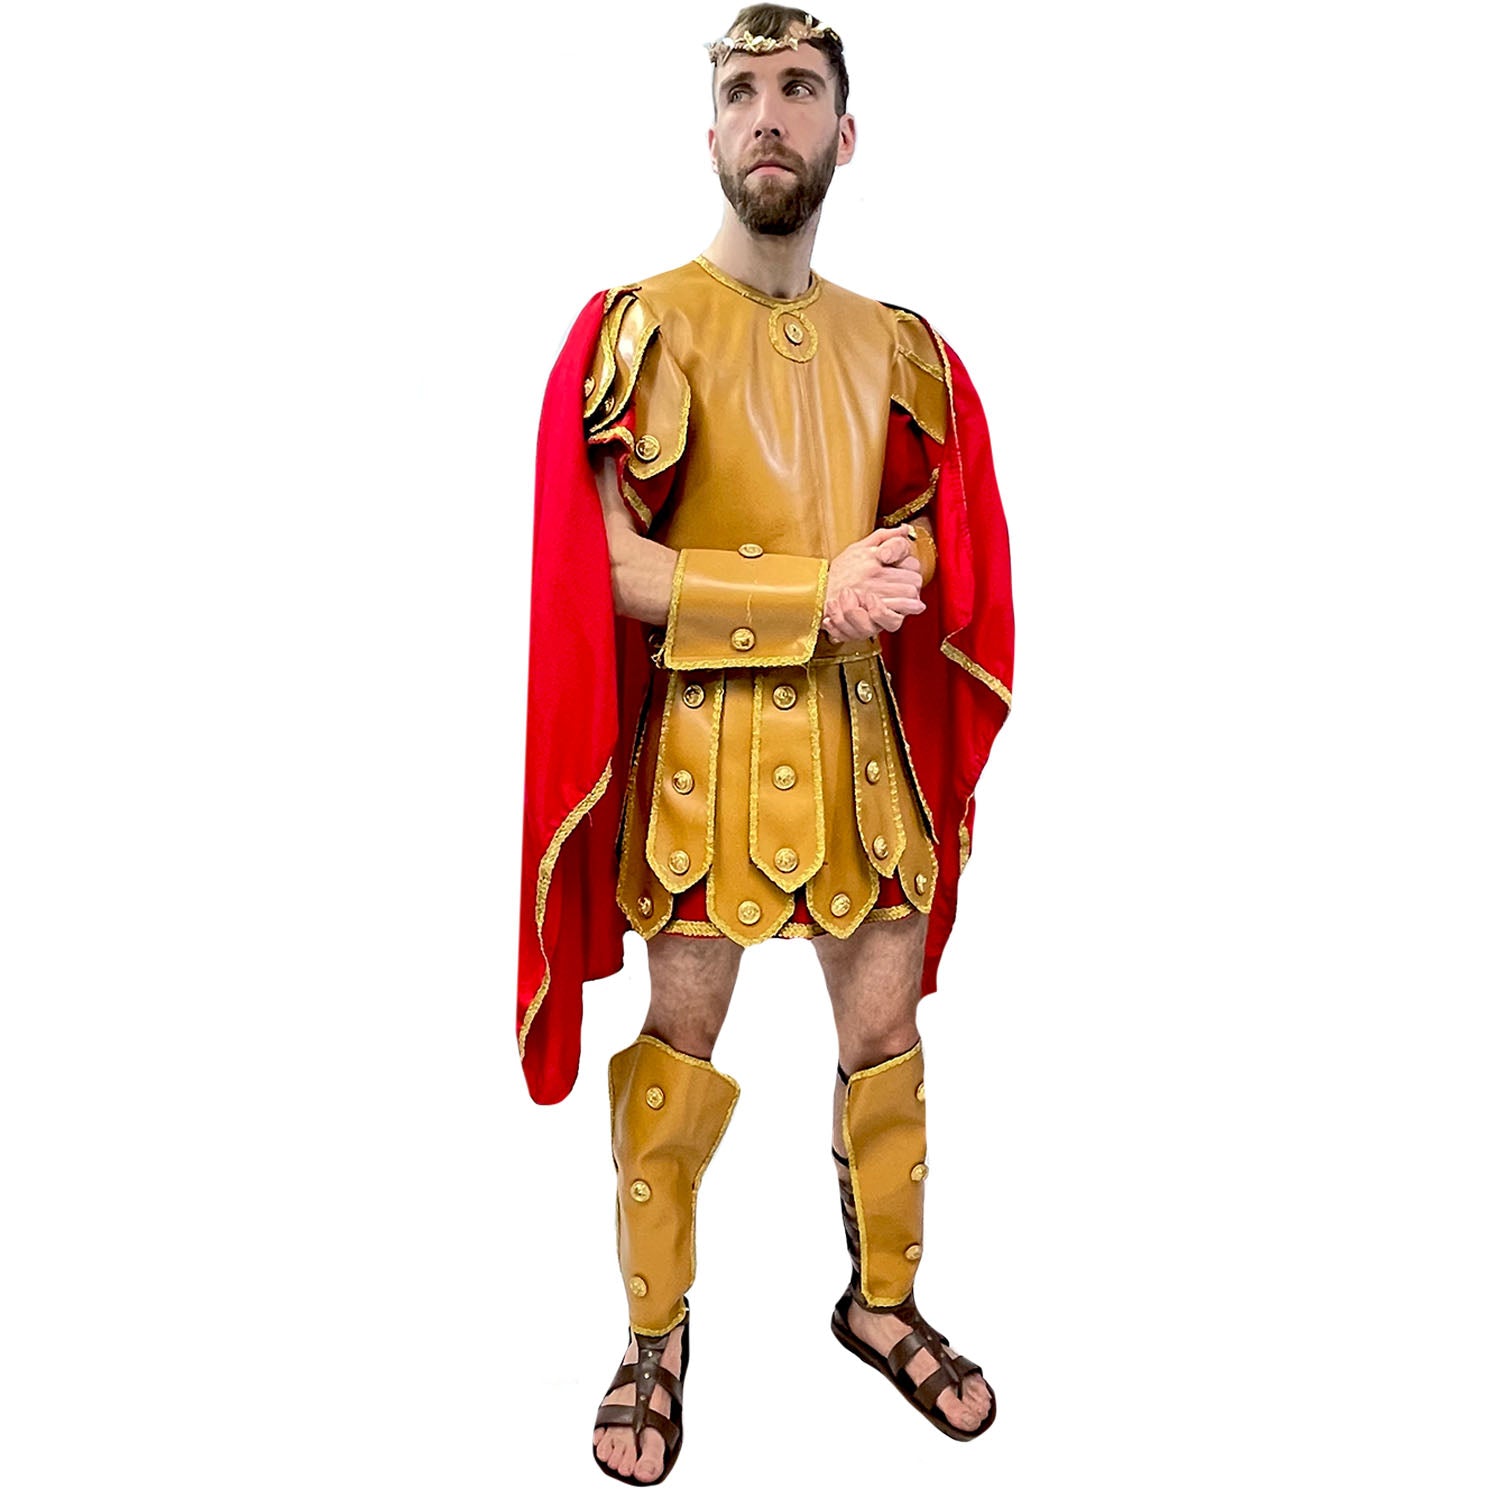 Exclusive Production Quality Roman Soldier Adult Costume